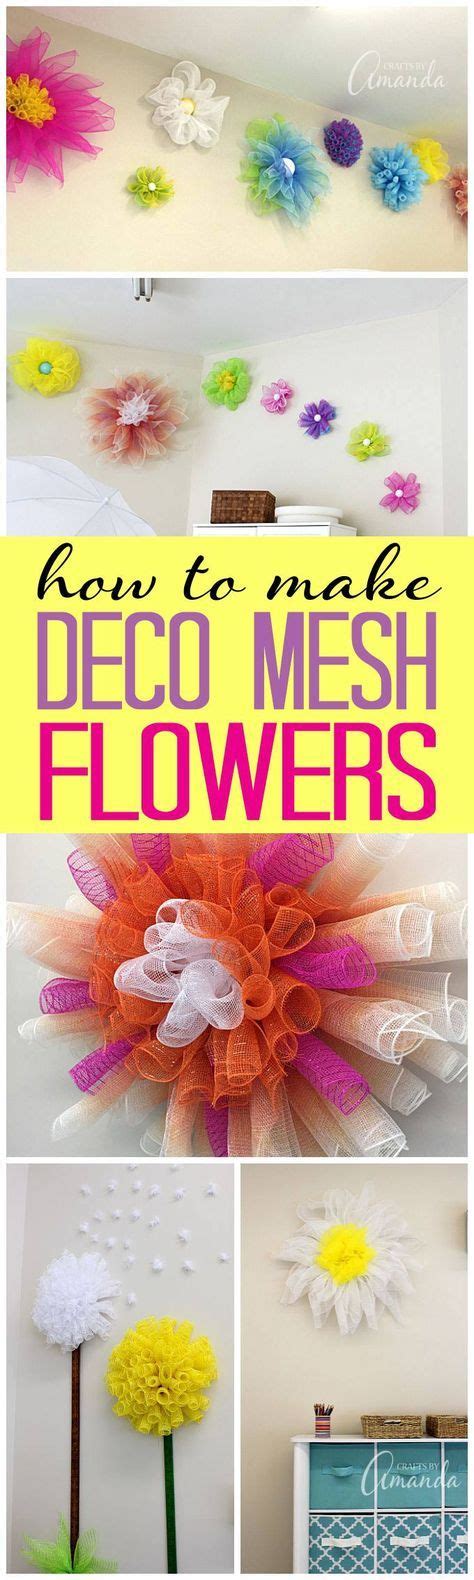 How To Make Beautiful Deco Mesh Flowers With Amanda Formaro Of Crafts